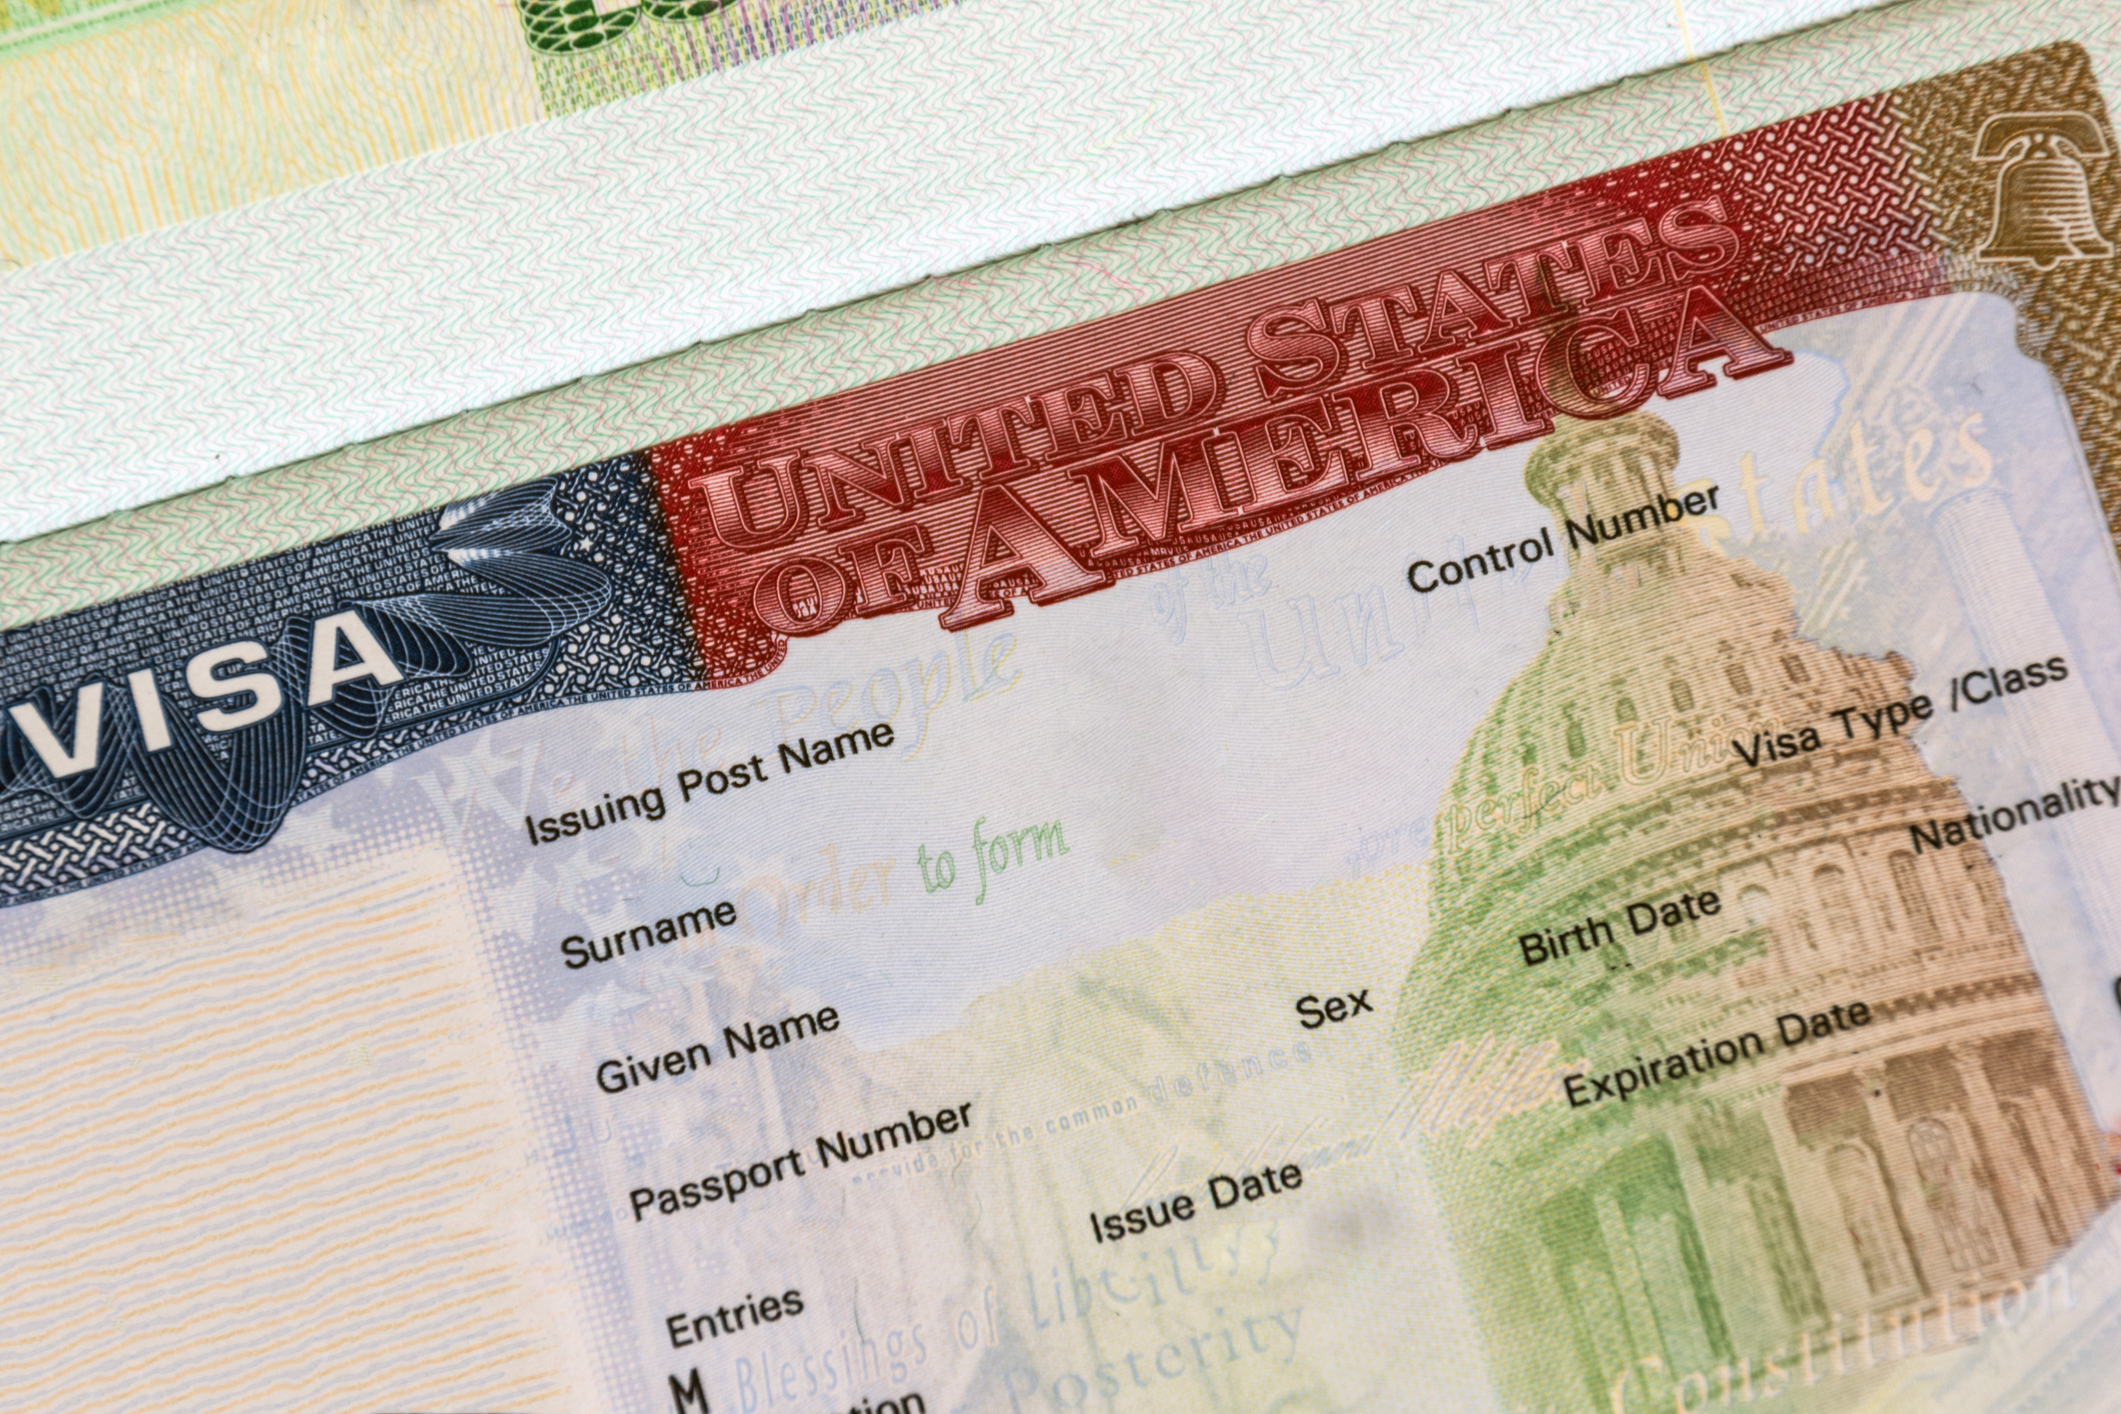 The Anwari Law Firm discusses why there has been a sharp increase in RFEs and denials for H1-B visas.